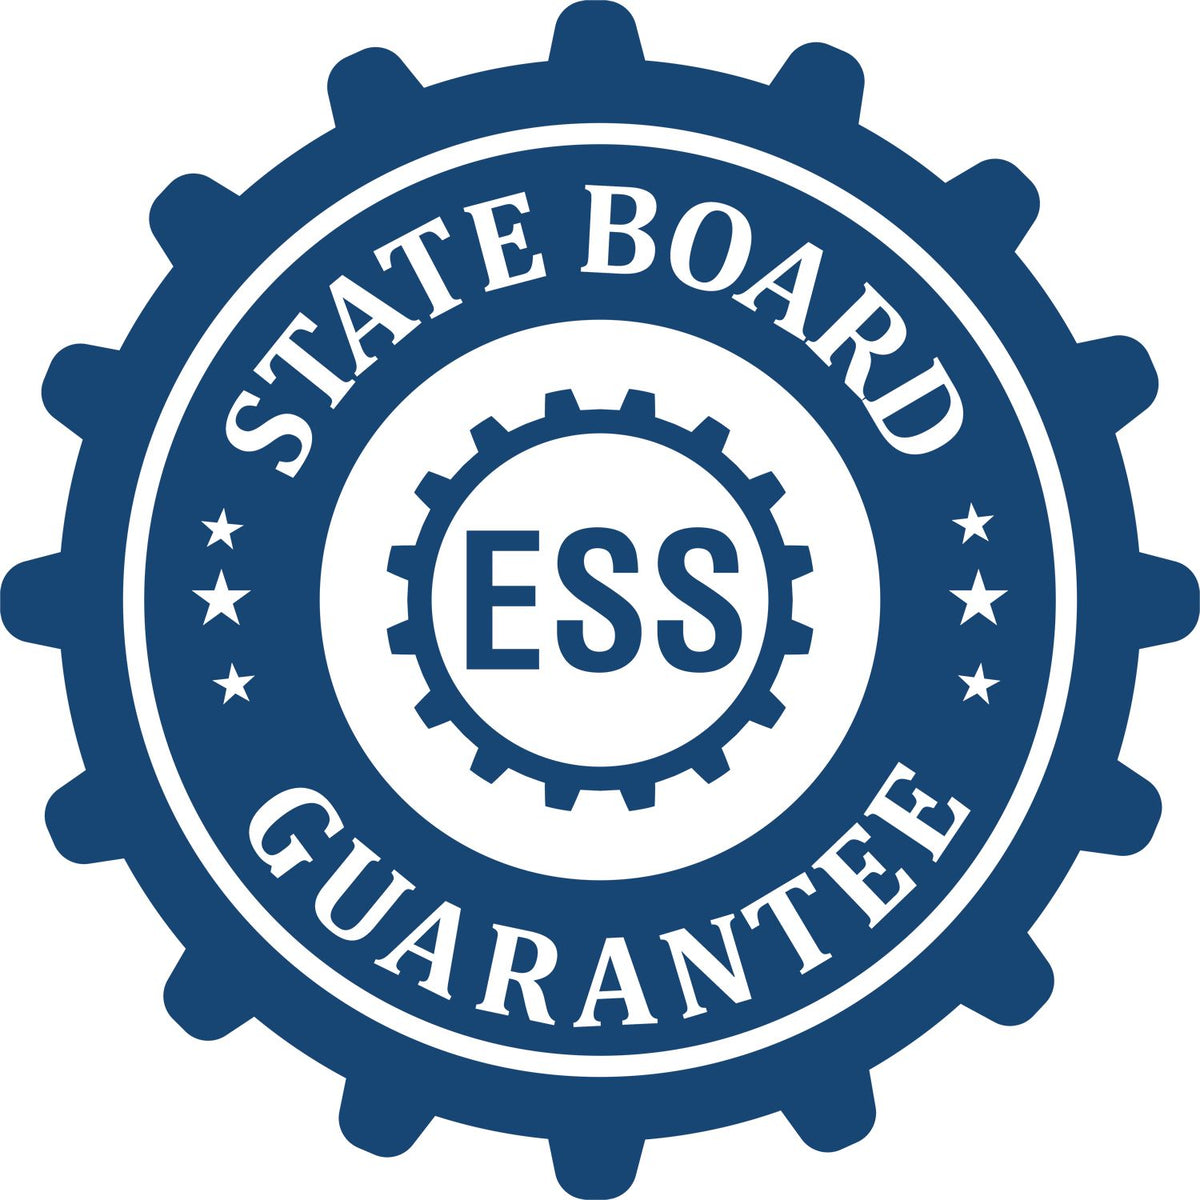 An emblem in a gear shape illustrating a state board guarantee for the Wooden Handle Delaware State Seal Notary Public Stamp product.